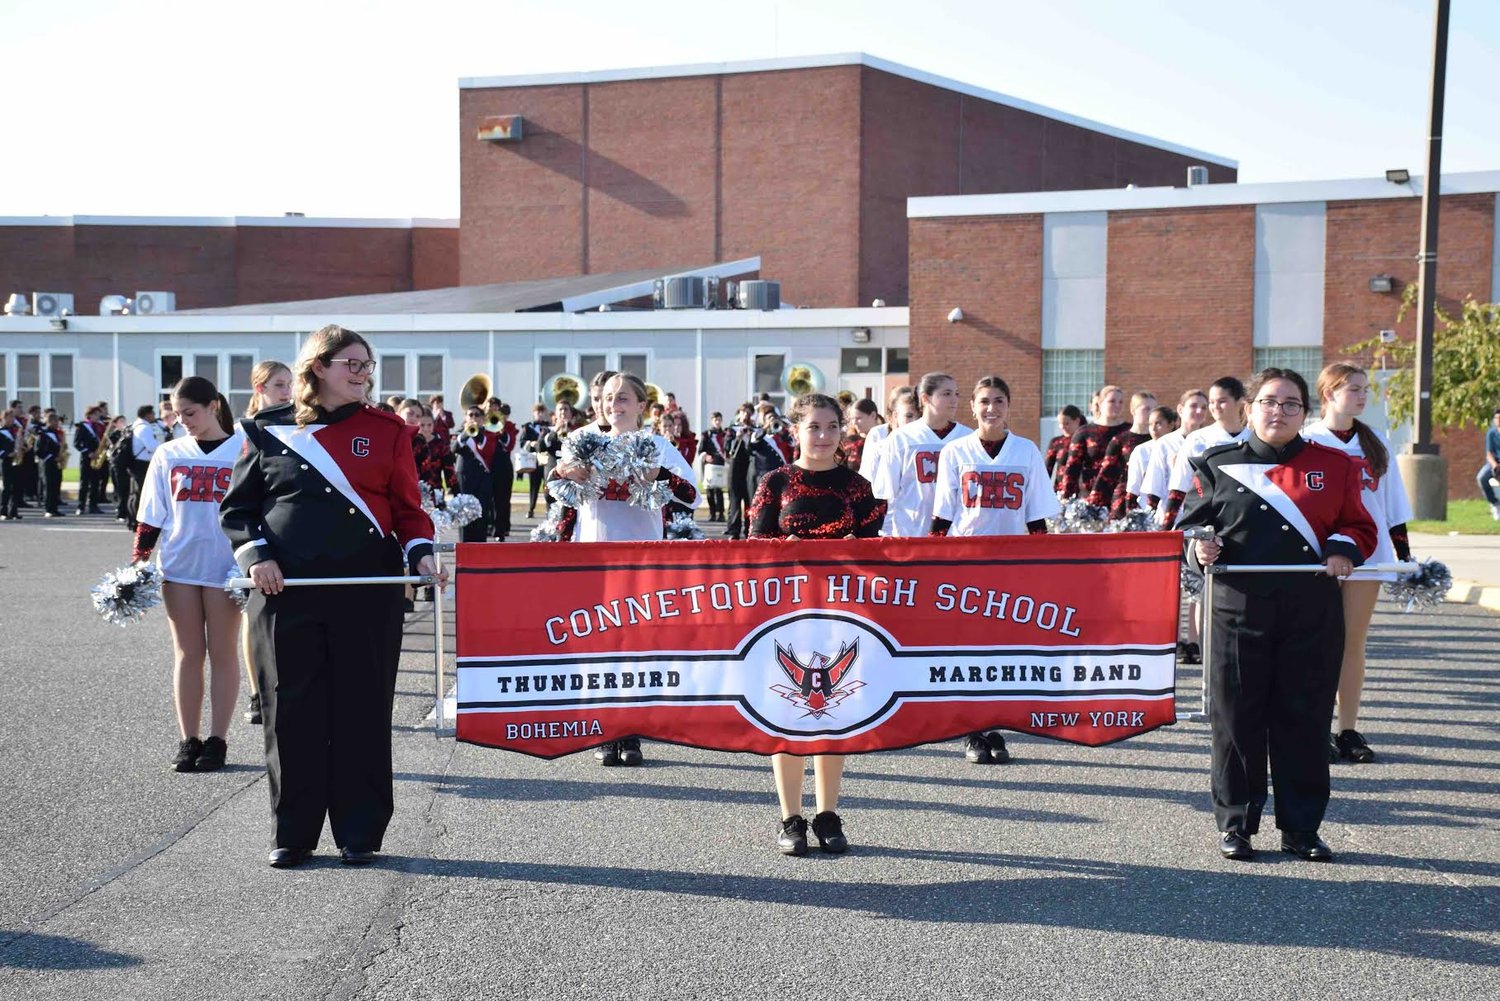 The Connetquot High School marching band led the homecoming parade down Seventh Avenue and to the football field.